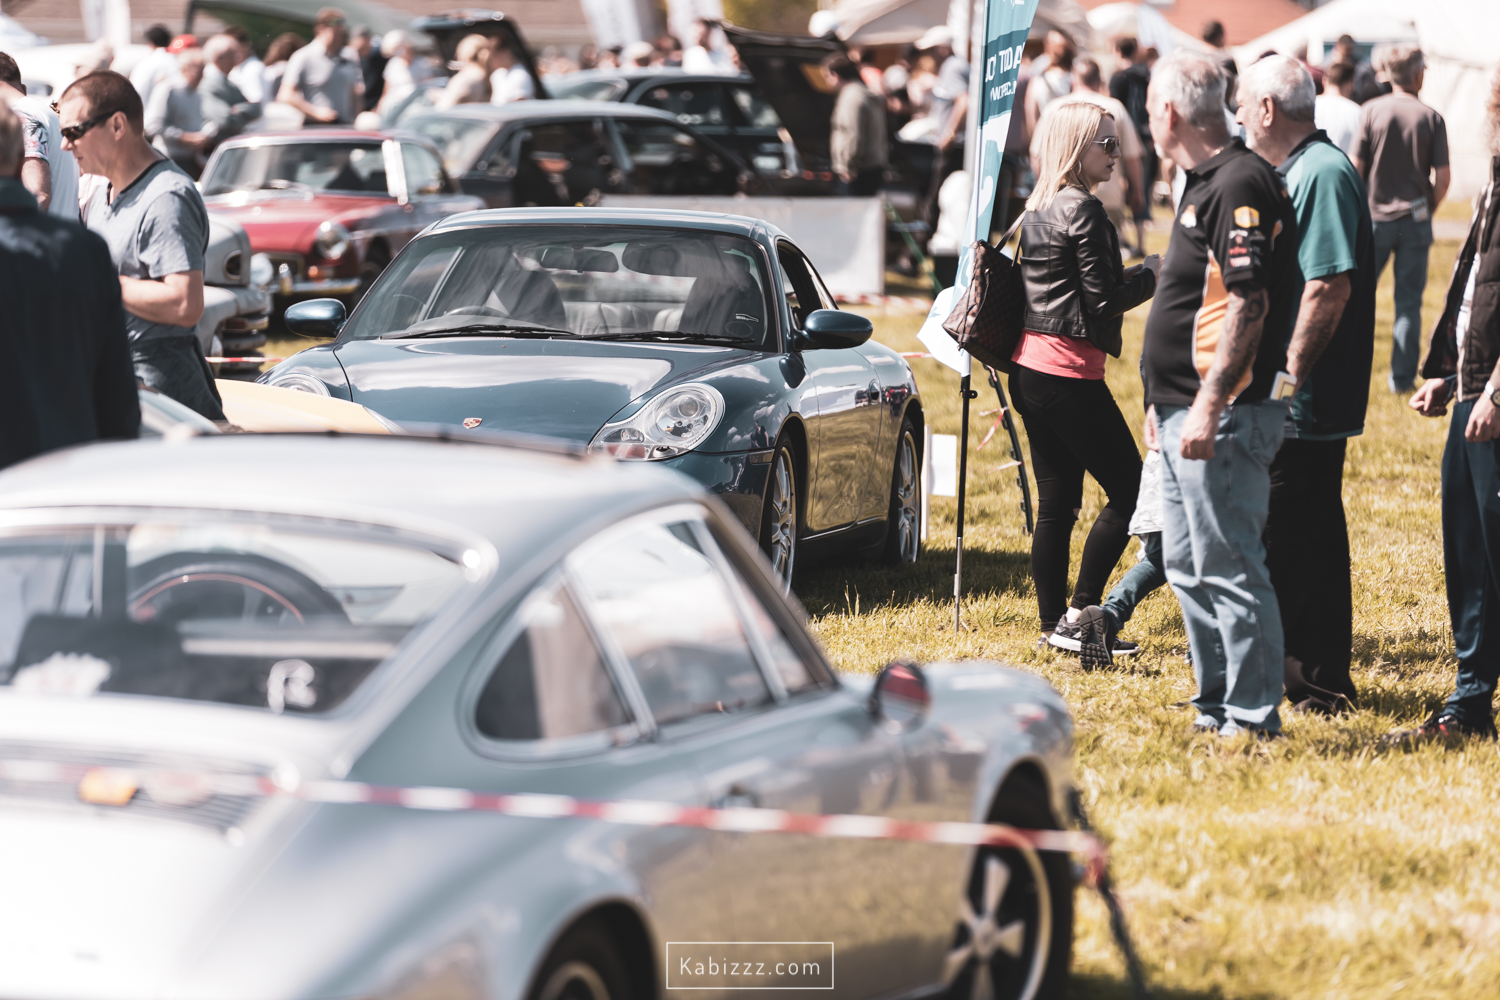 Kabizzz_Photography_Stirling_District_Classic _cars-139.jpg